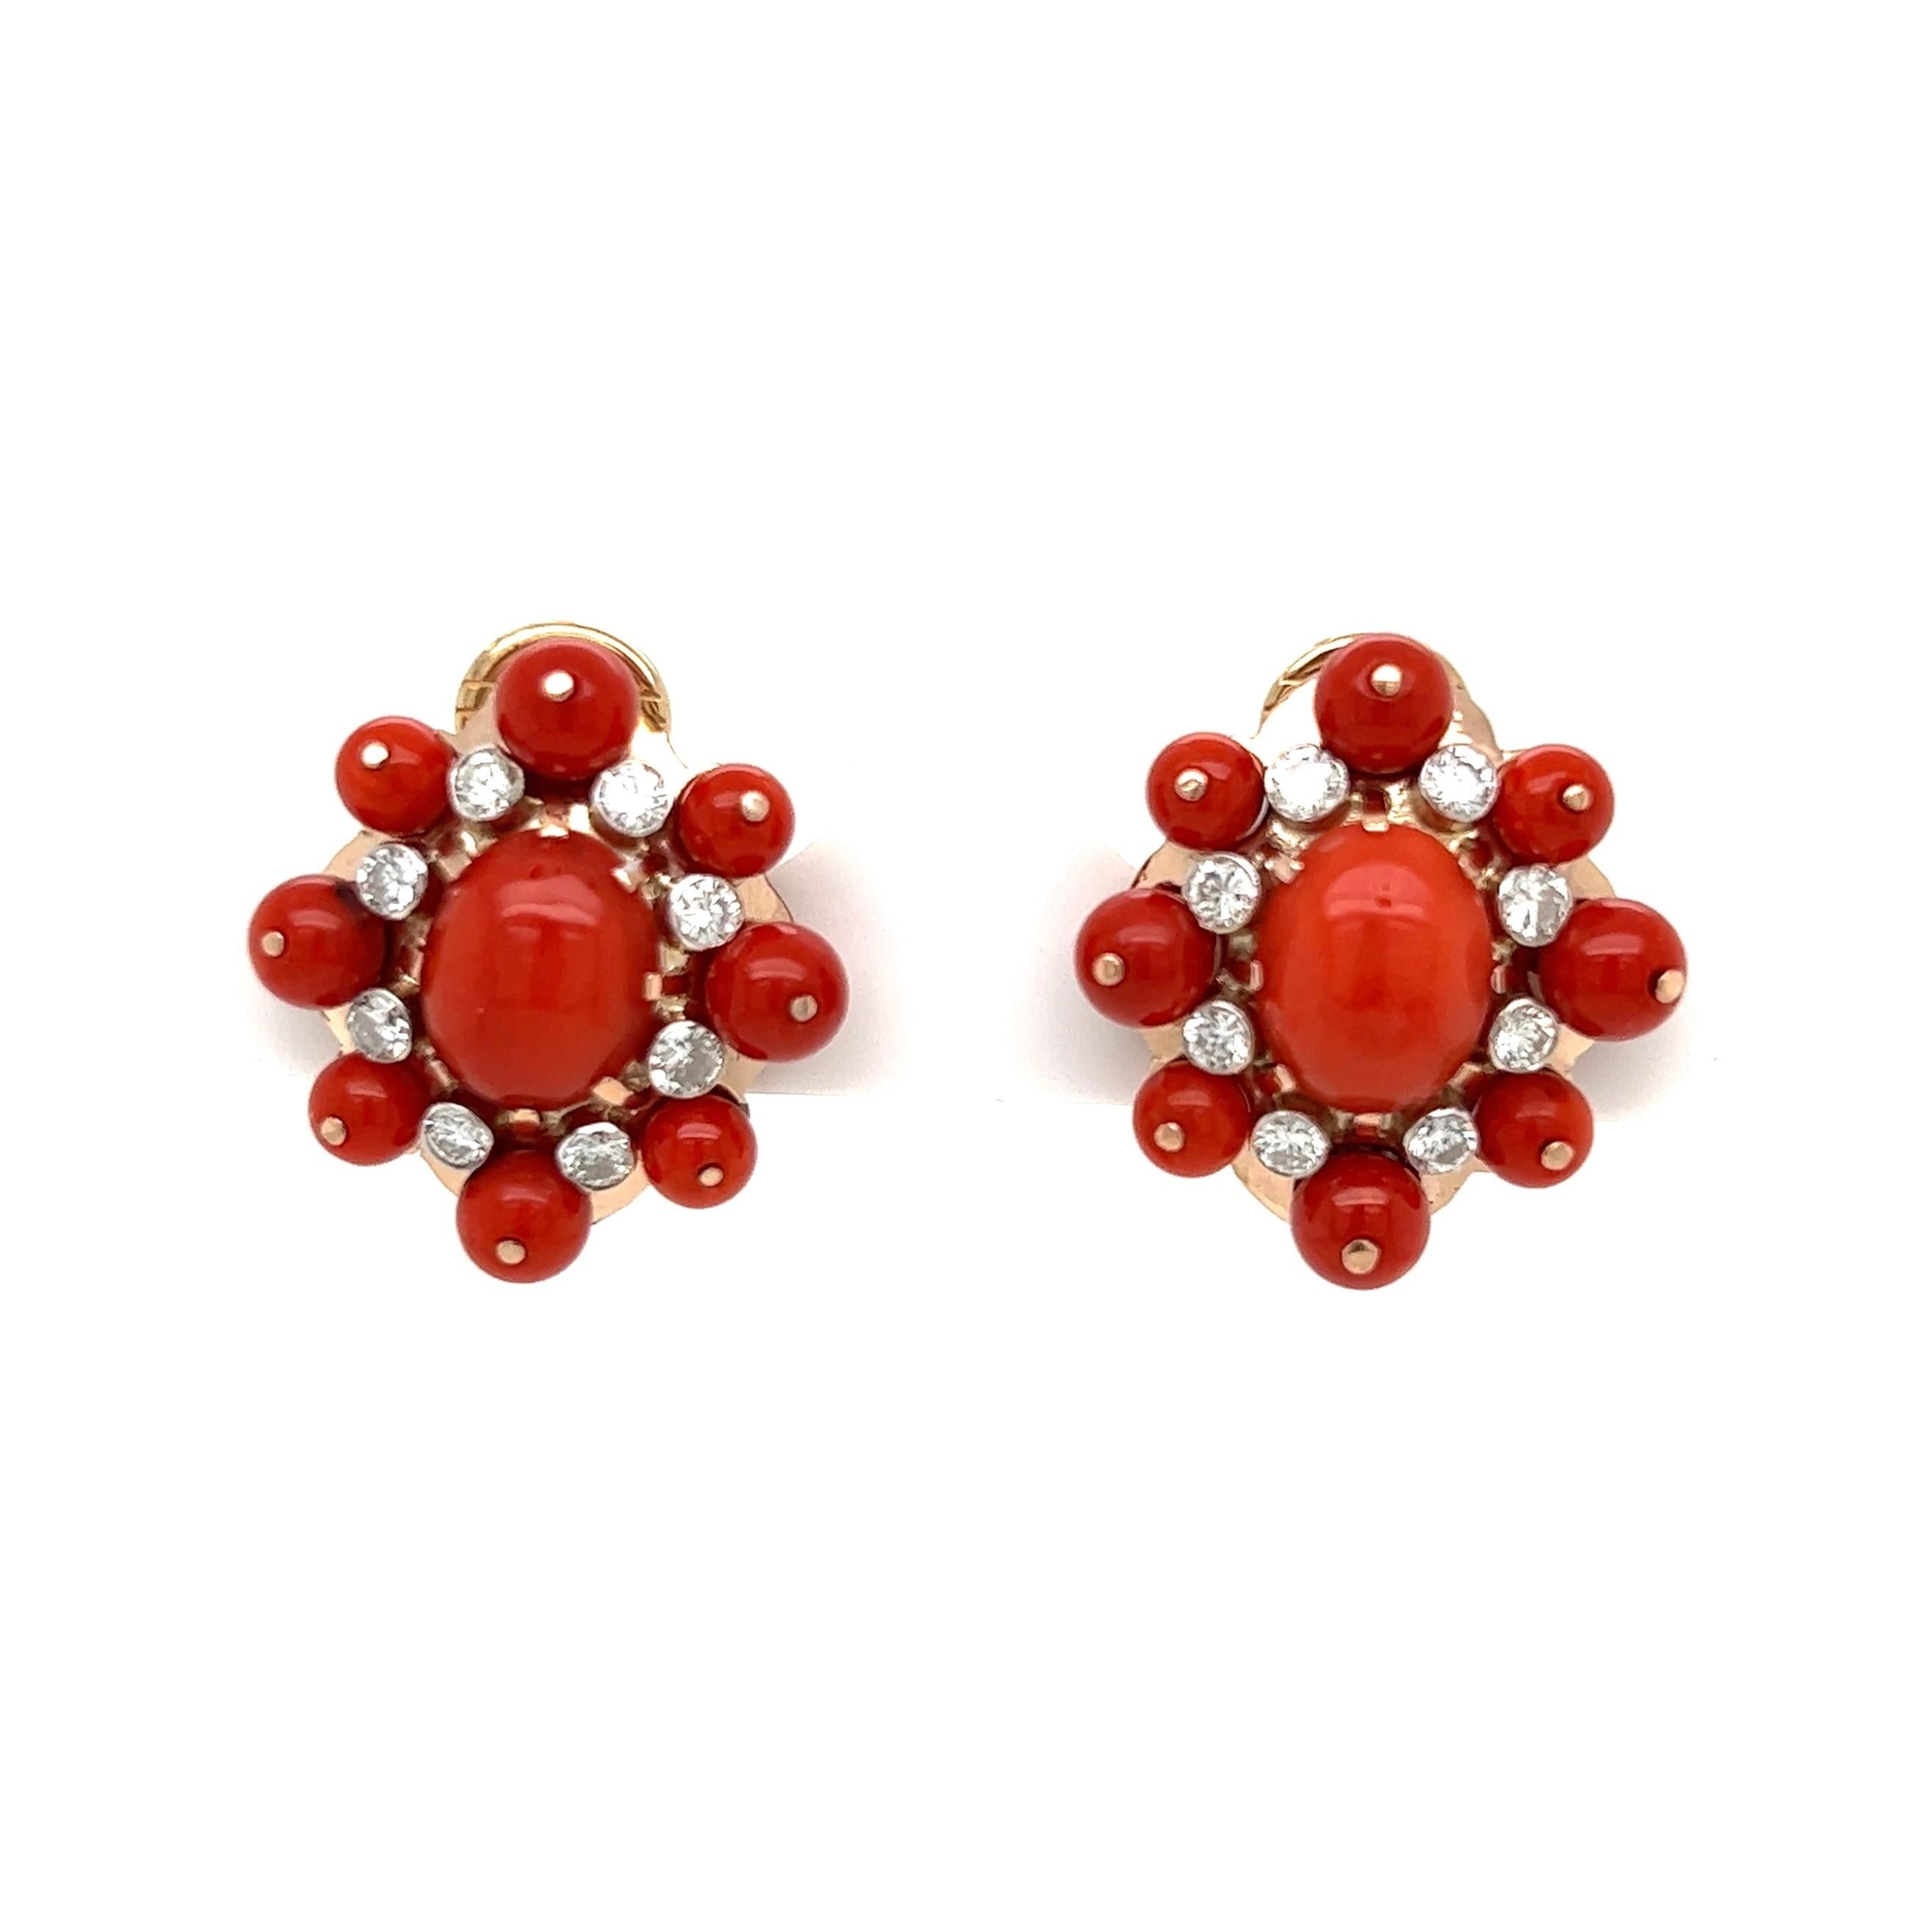 Simply Beautiful! High quality Red Coral and Diamond Cluster Earrings. Hand set with Awesome Red Coral and 16 Round Brilliant-Cut Diamonds, approx. 1.12tcw Dimensions 0.88